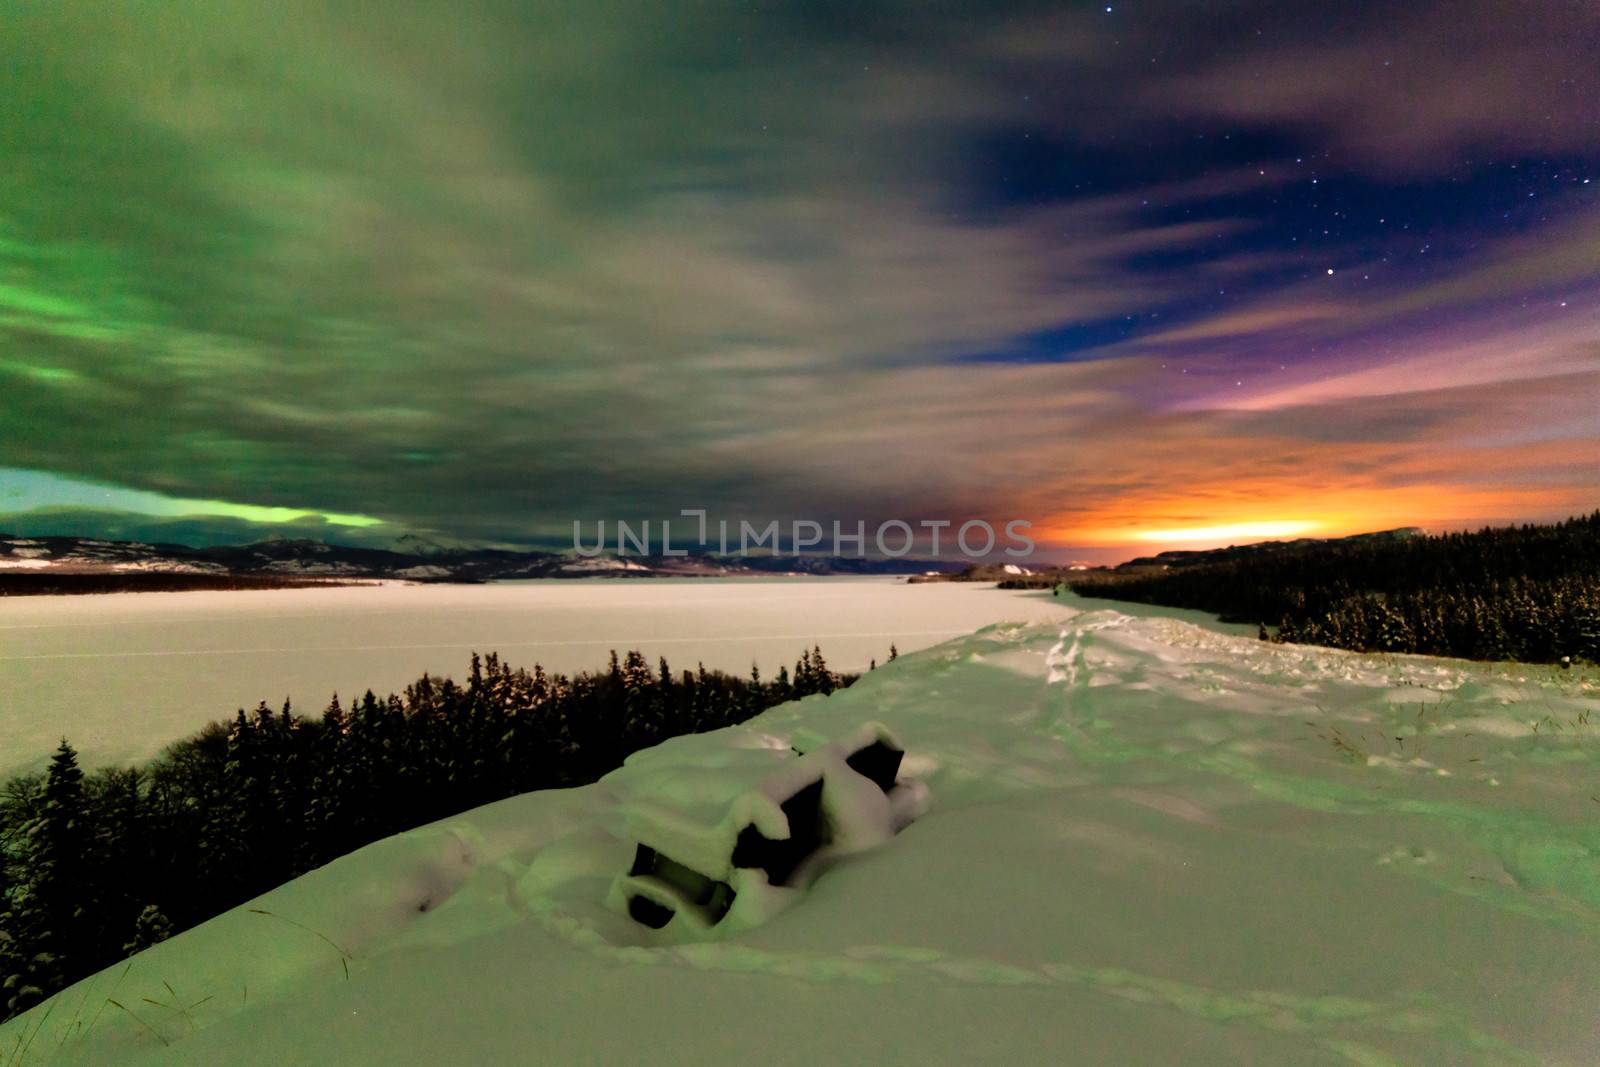 Spectacular view from snow-covered bench: Northern Lights or Aurora borealis clouds and light pollution from the city of Whitehorse over frozen Lake Laberge Yukon Territory Canada winter landscape